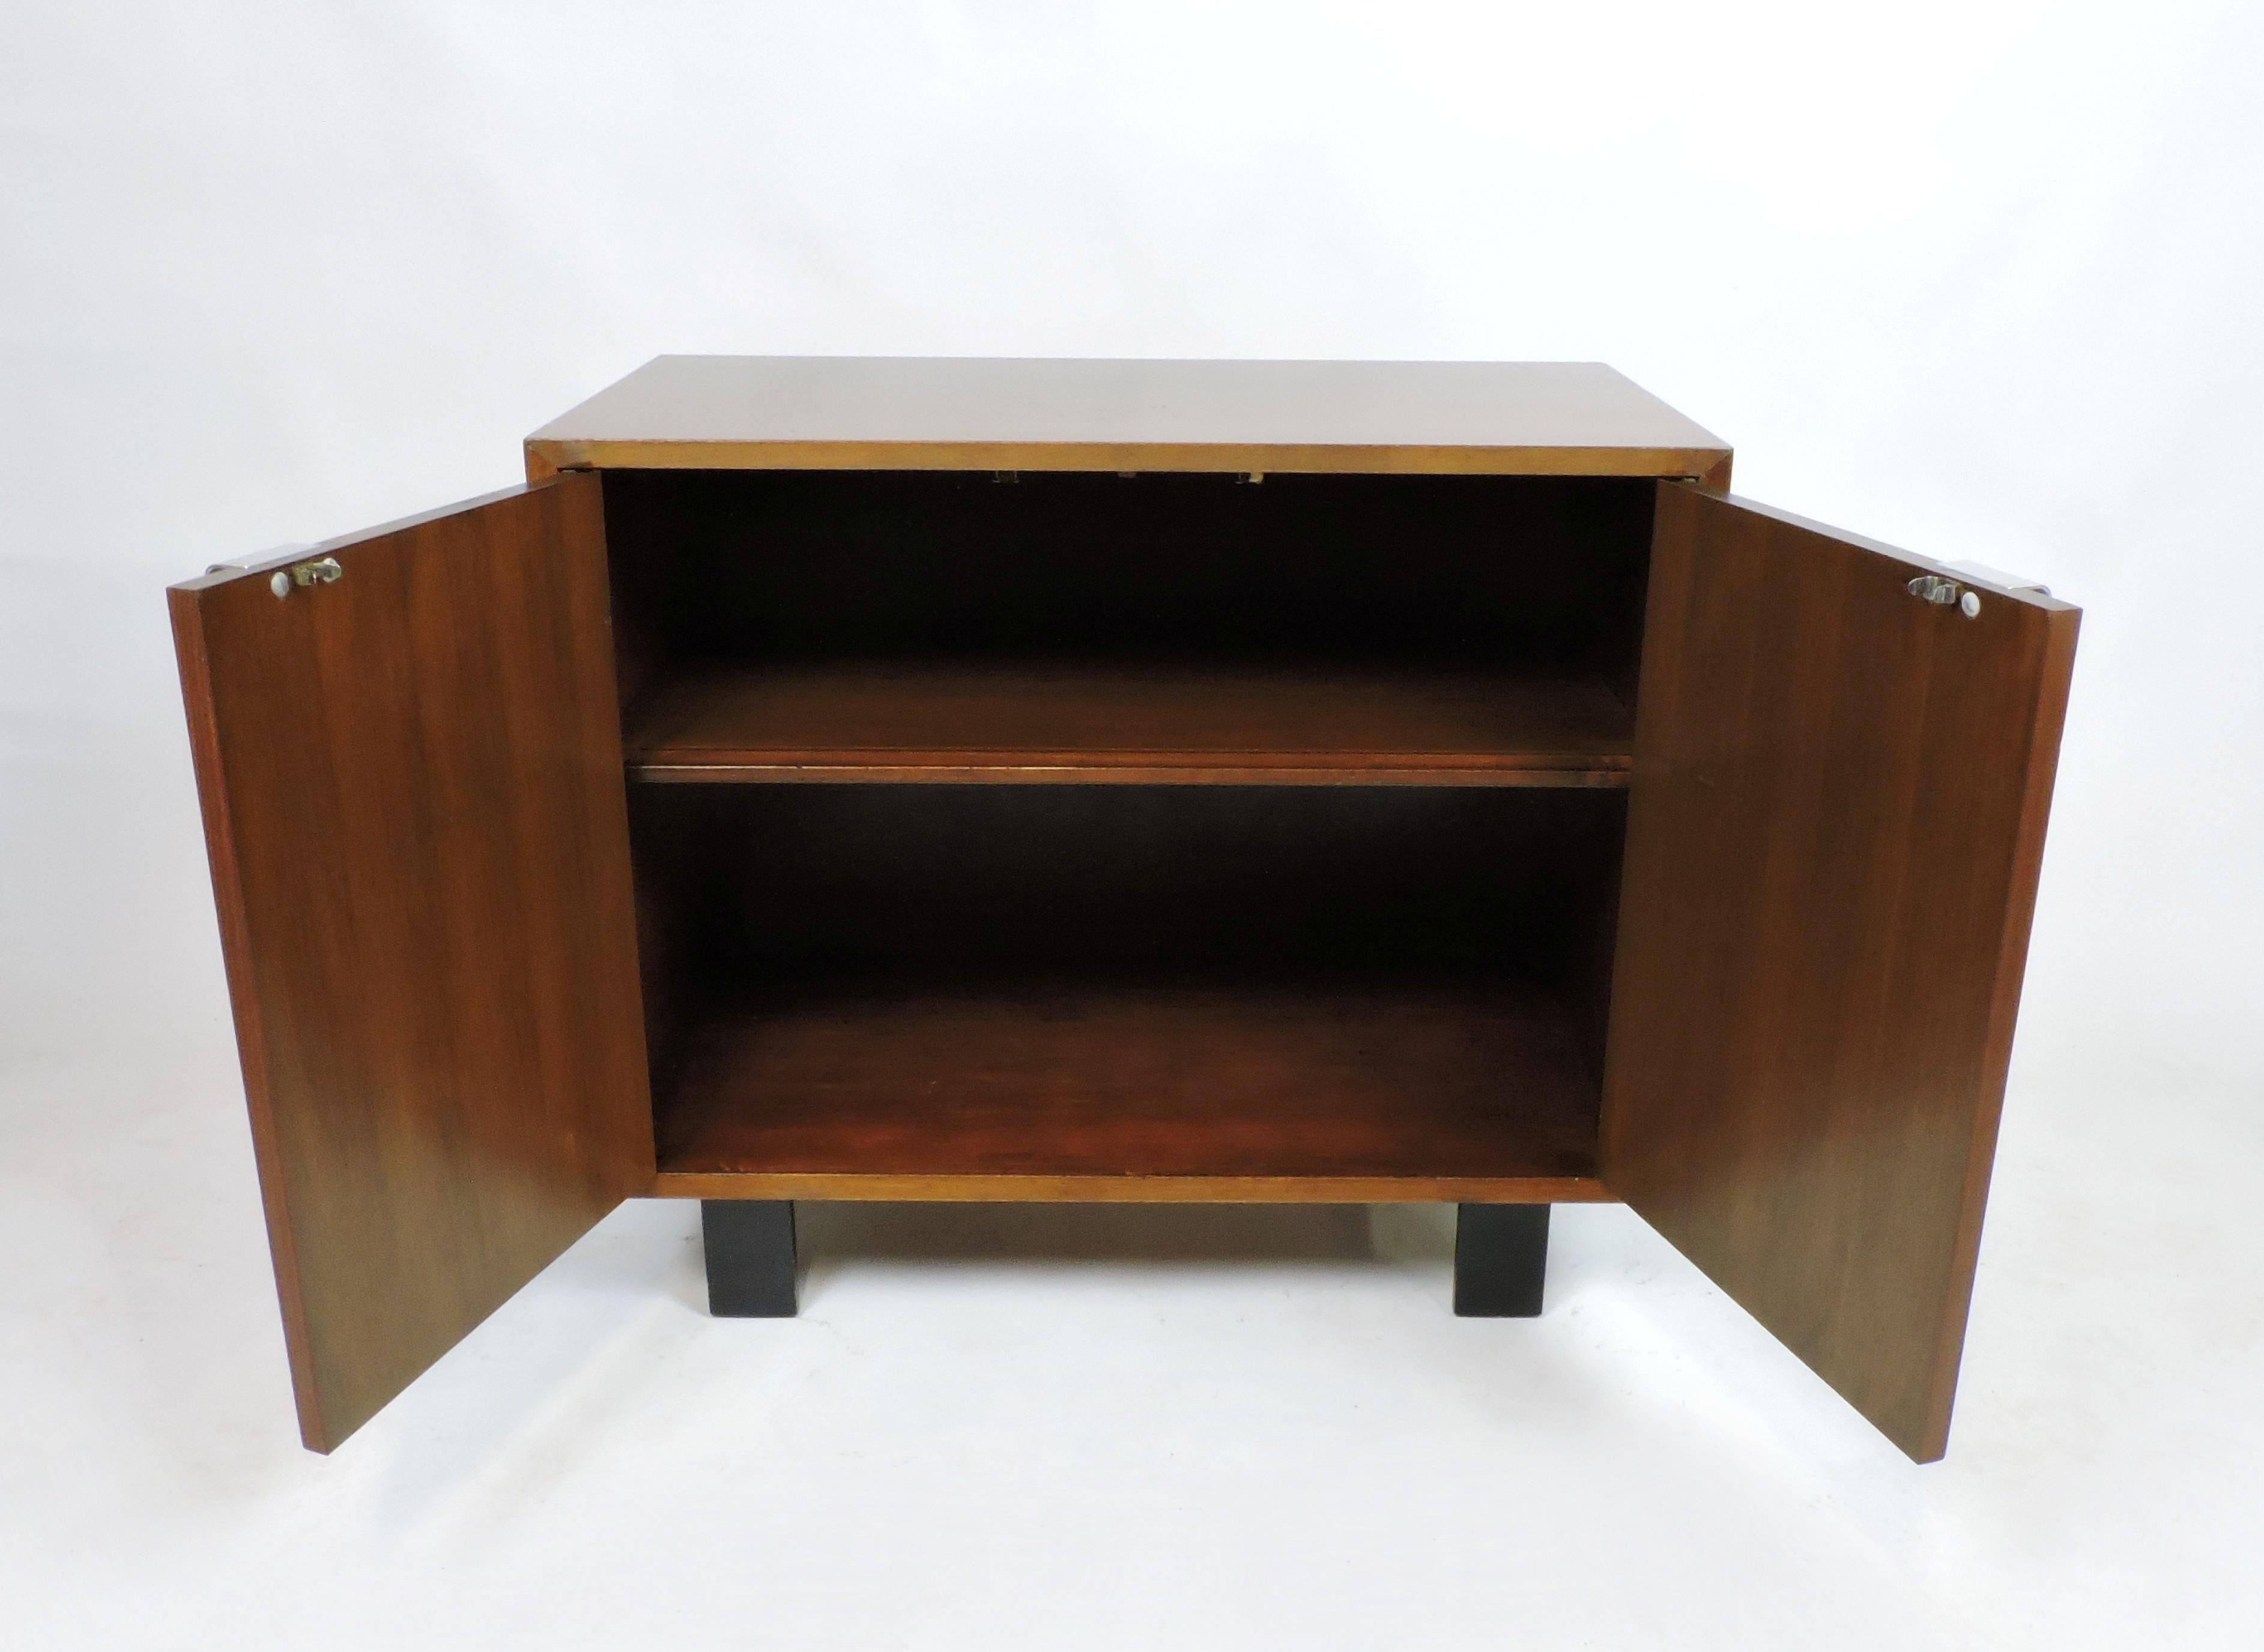 Handsome and distinctive walnut cabinet designed by George Nelson and manufactured by Herman Miller. Part of the Basic Cabinet Series, this cabinet has two doors and an interior adjustable shelf. Classic J shaped metal pulls and black block feet